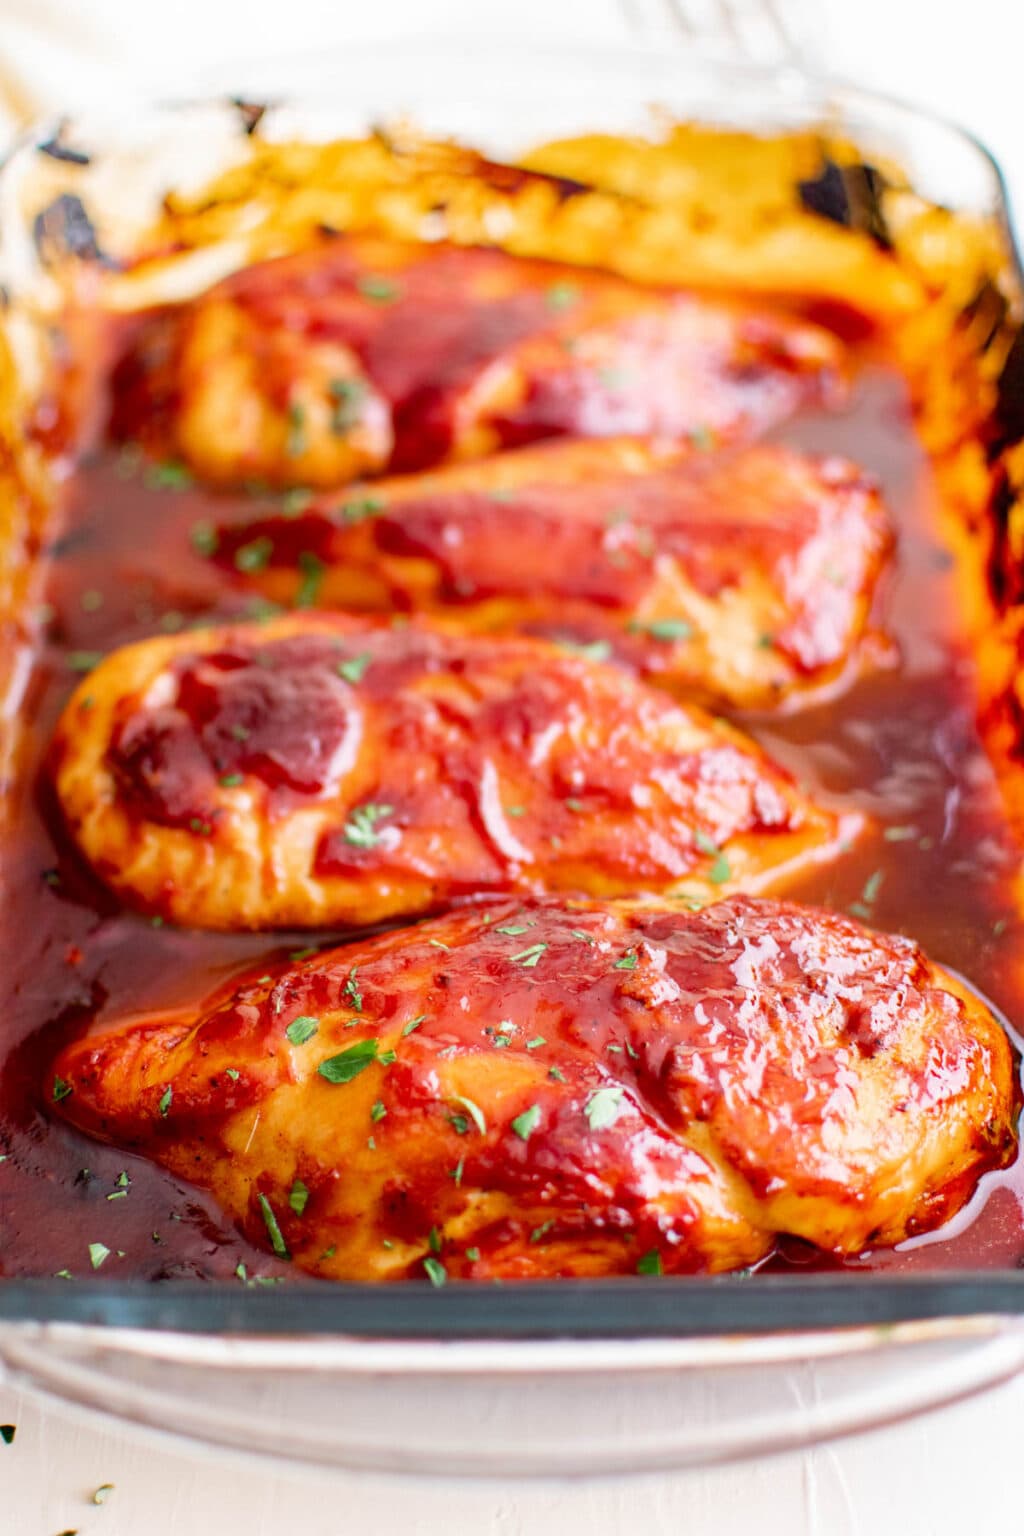 Easy Baked BBQ Chicken Breast Recipe (Oven Barbecue Chicken)